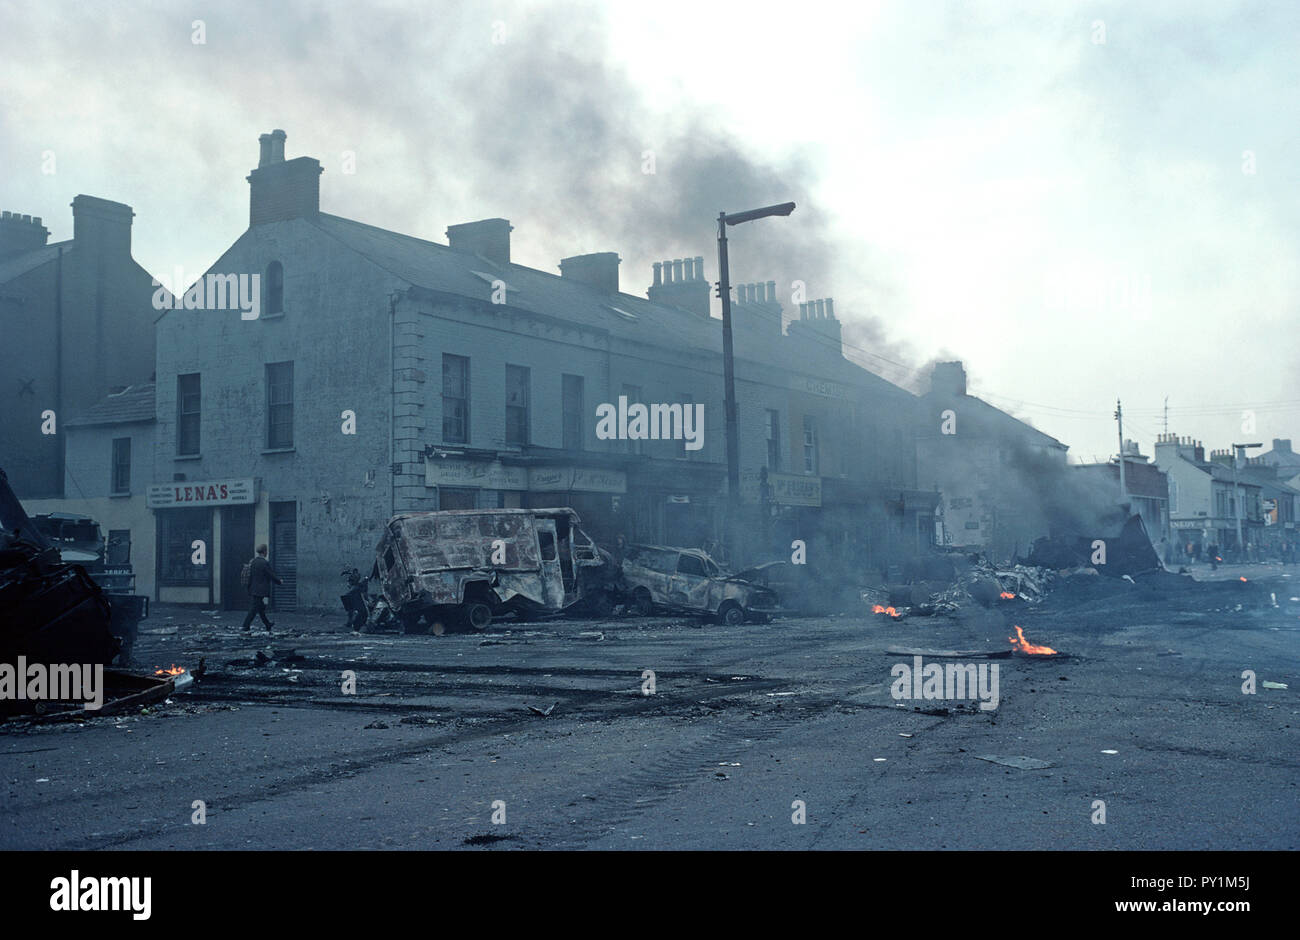 Belfast, 1976: aftermath of a night of rioting and burning vehicles in the Falls Road, West Belfast a predominately Nationalist area, during The Troubles, Northern Ireland Conflict Stock Photo